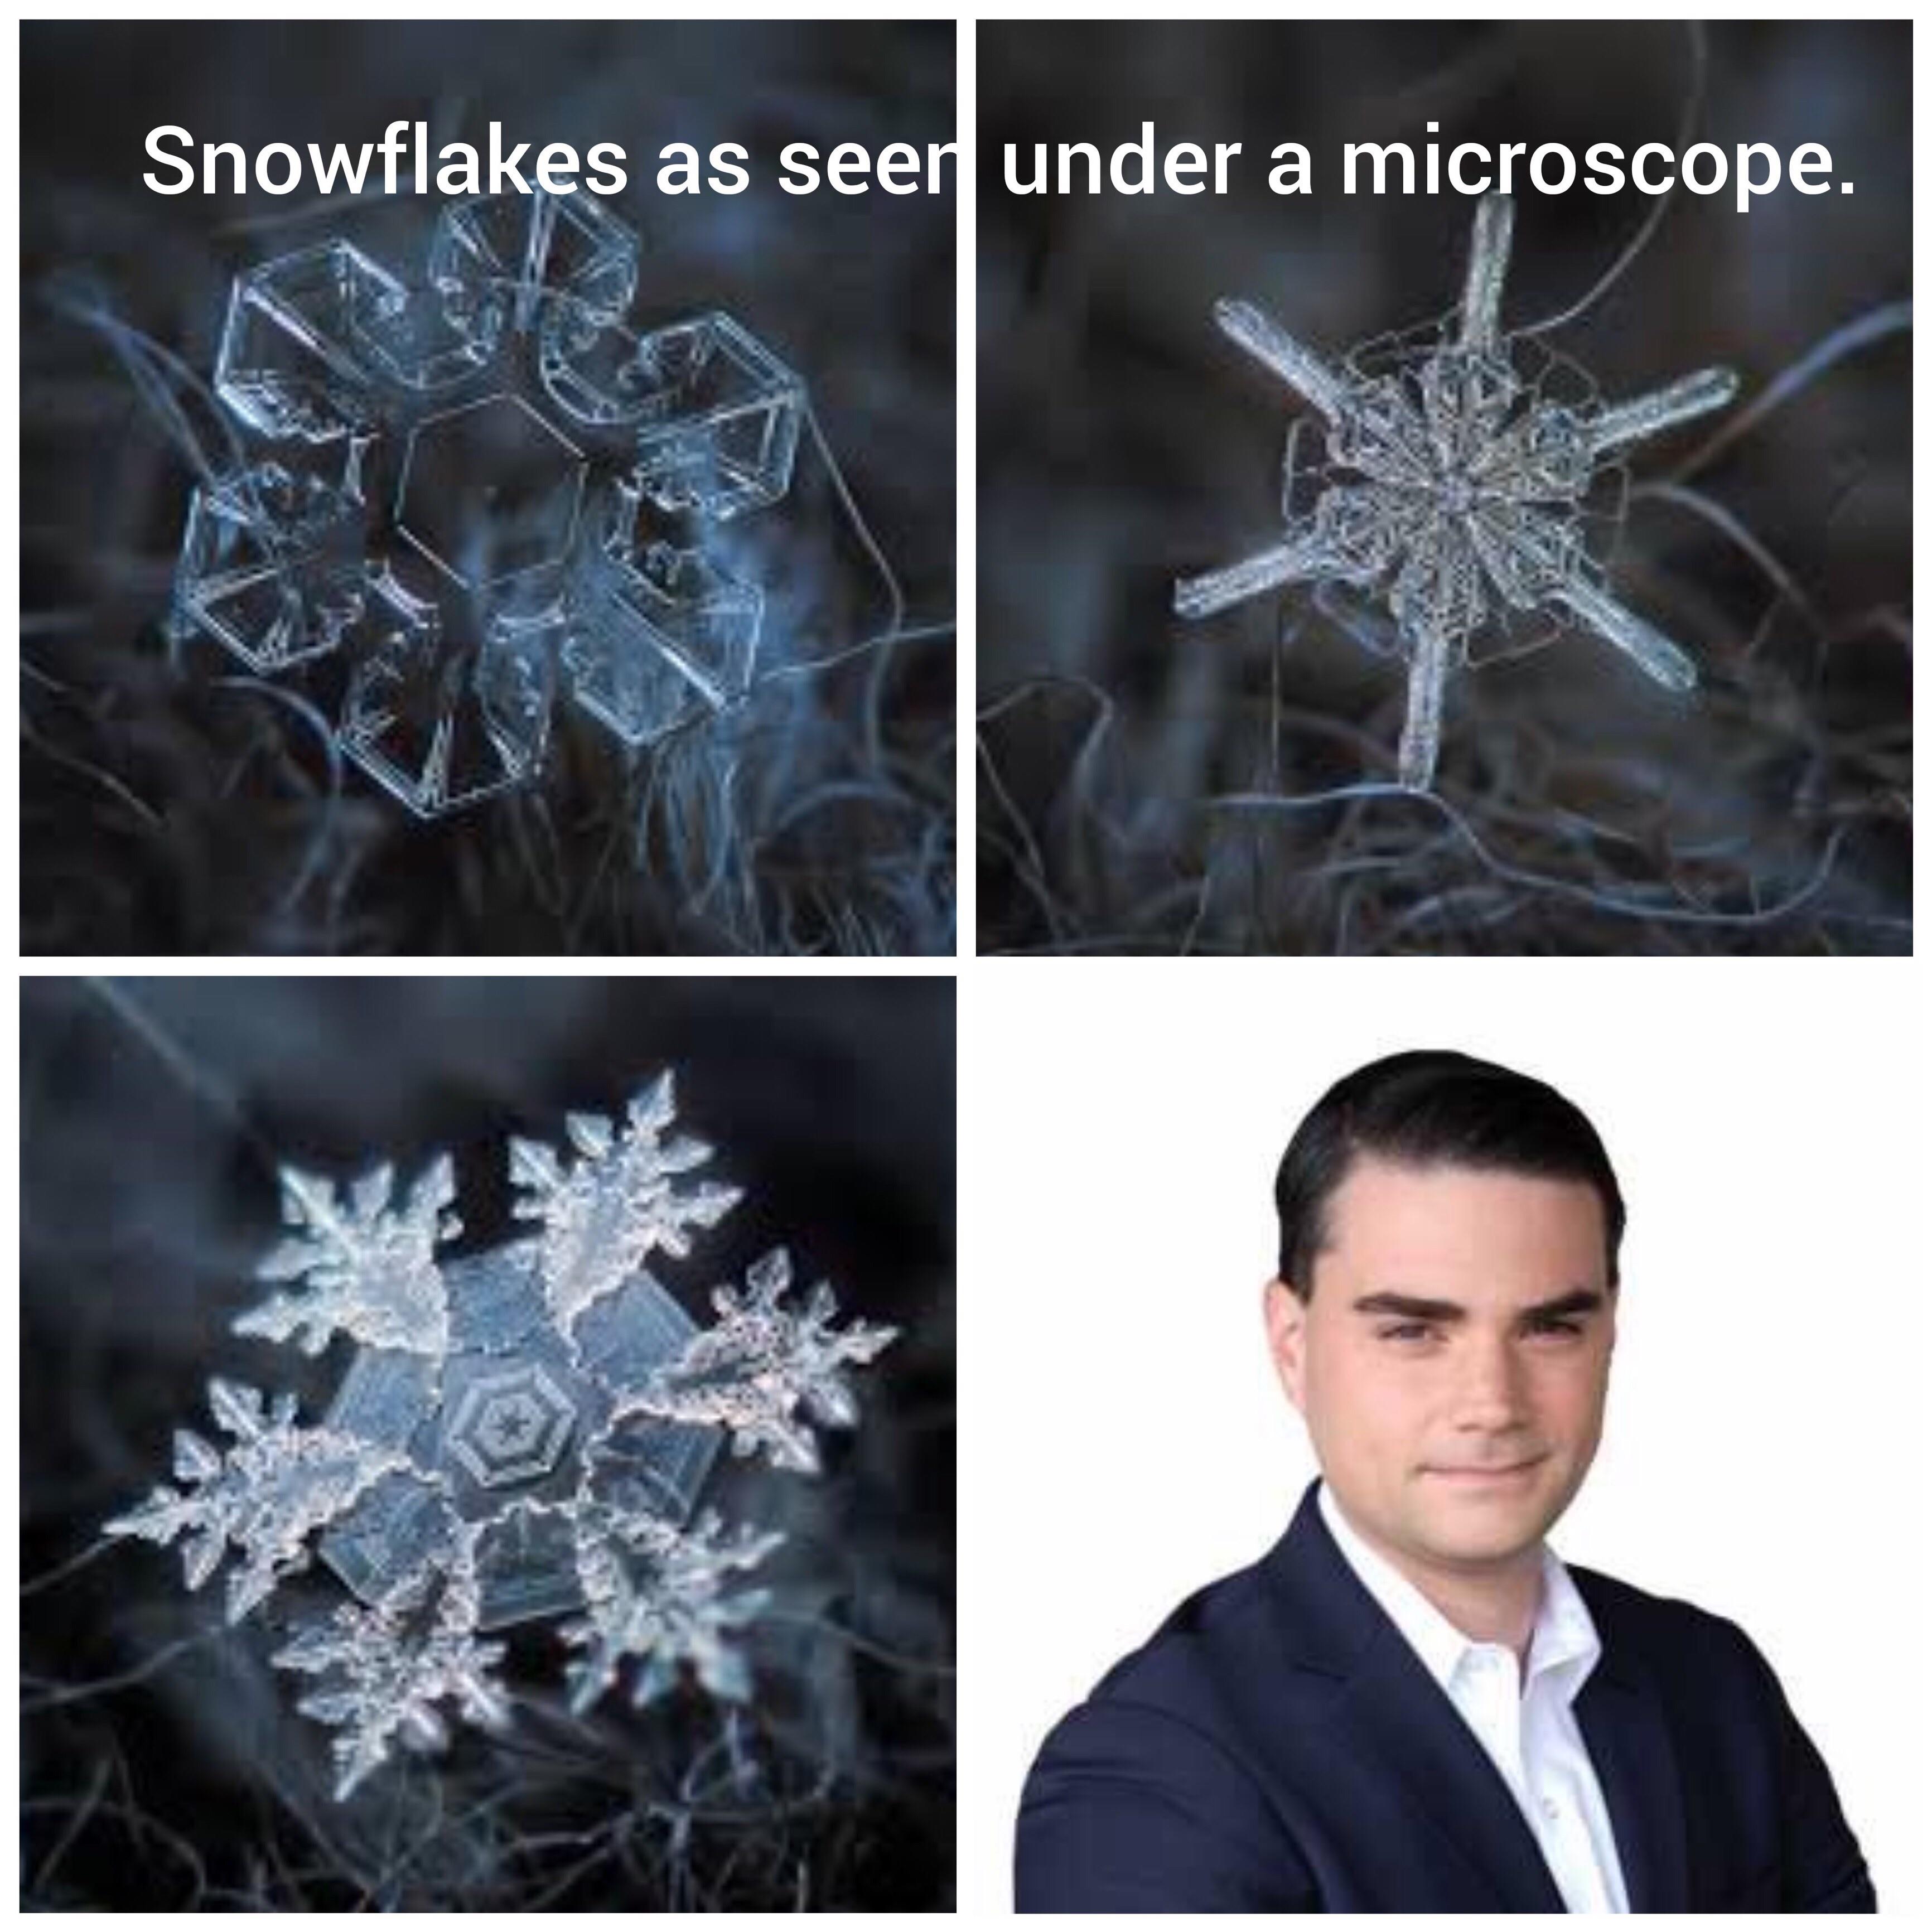 snowflakes under micriscope - Snowflakes as seer under a microscope.